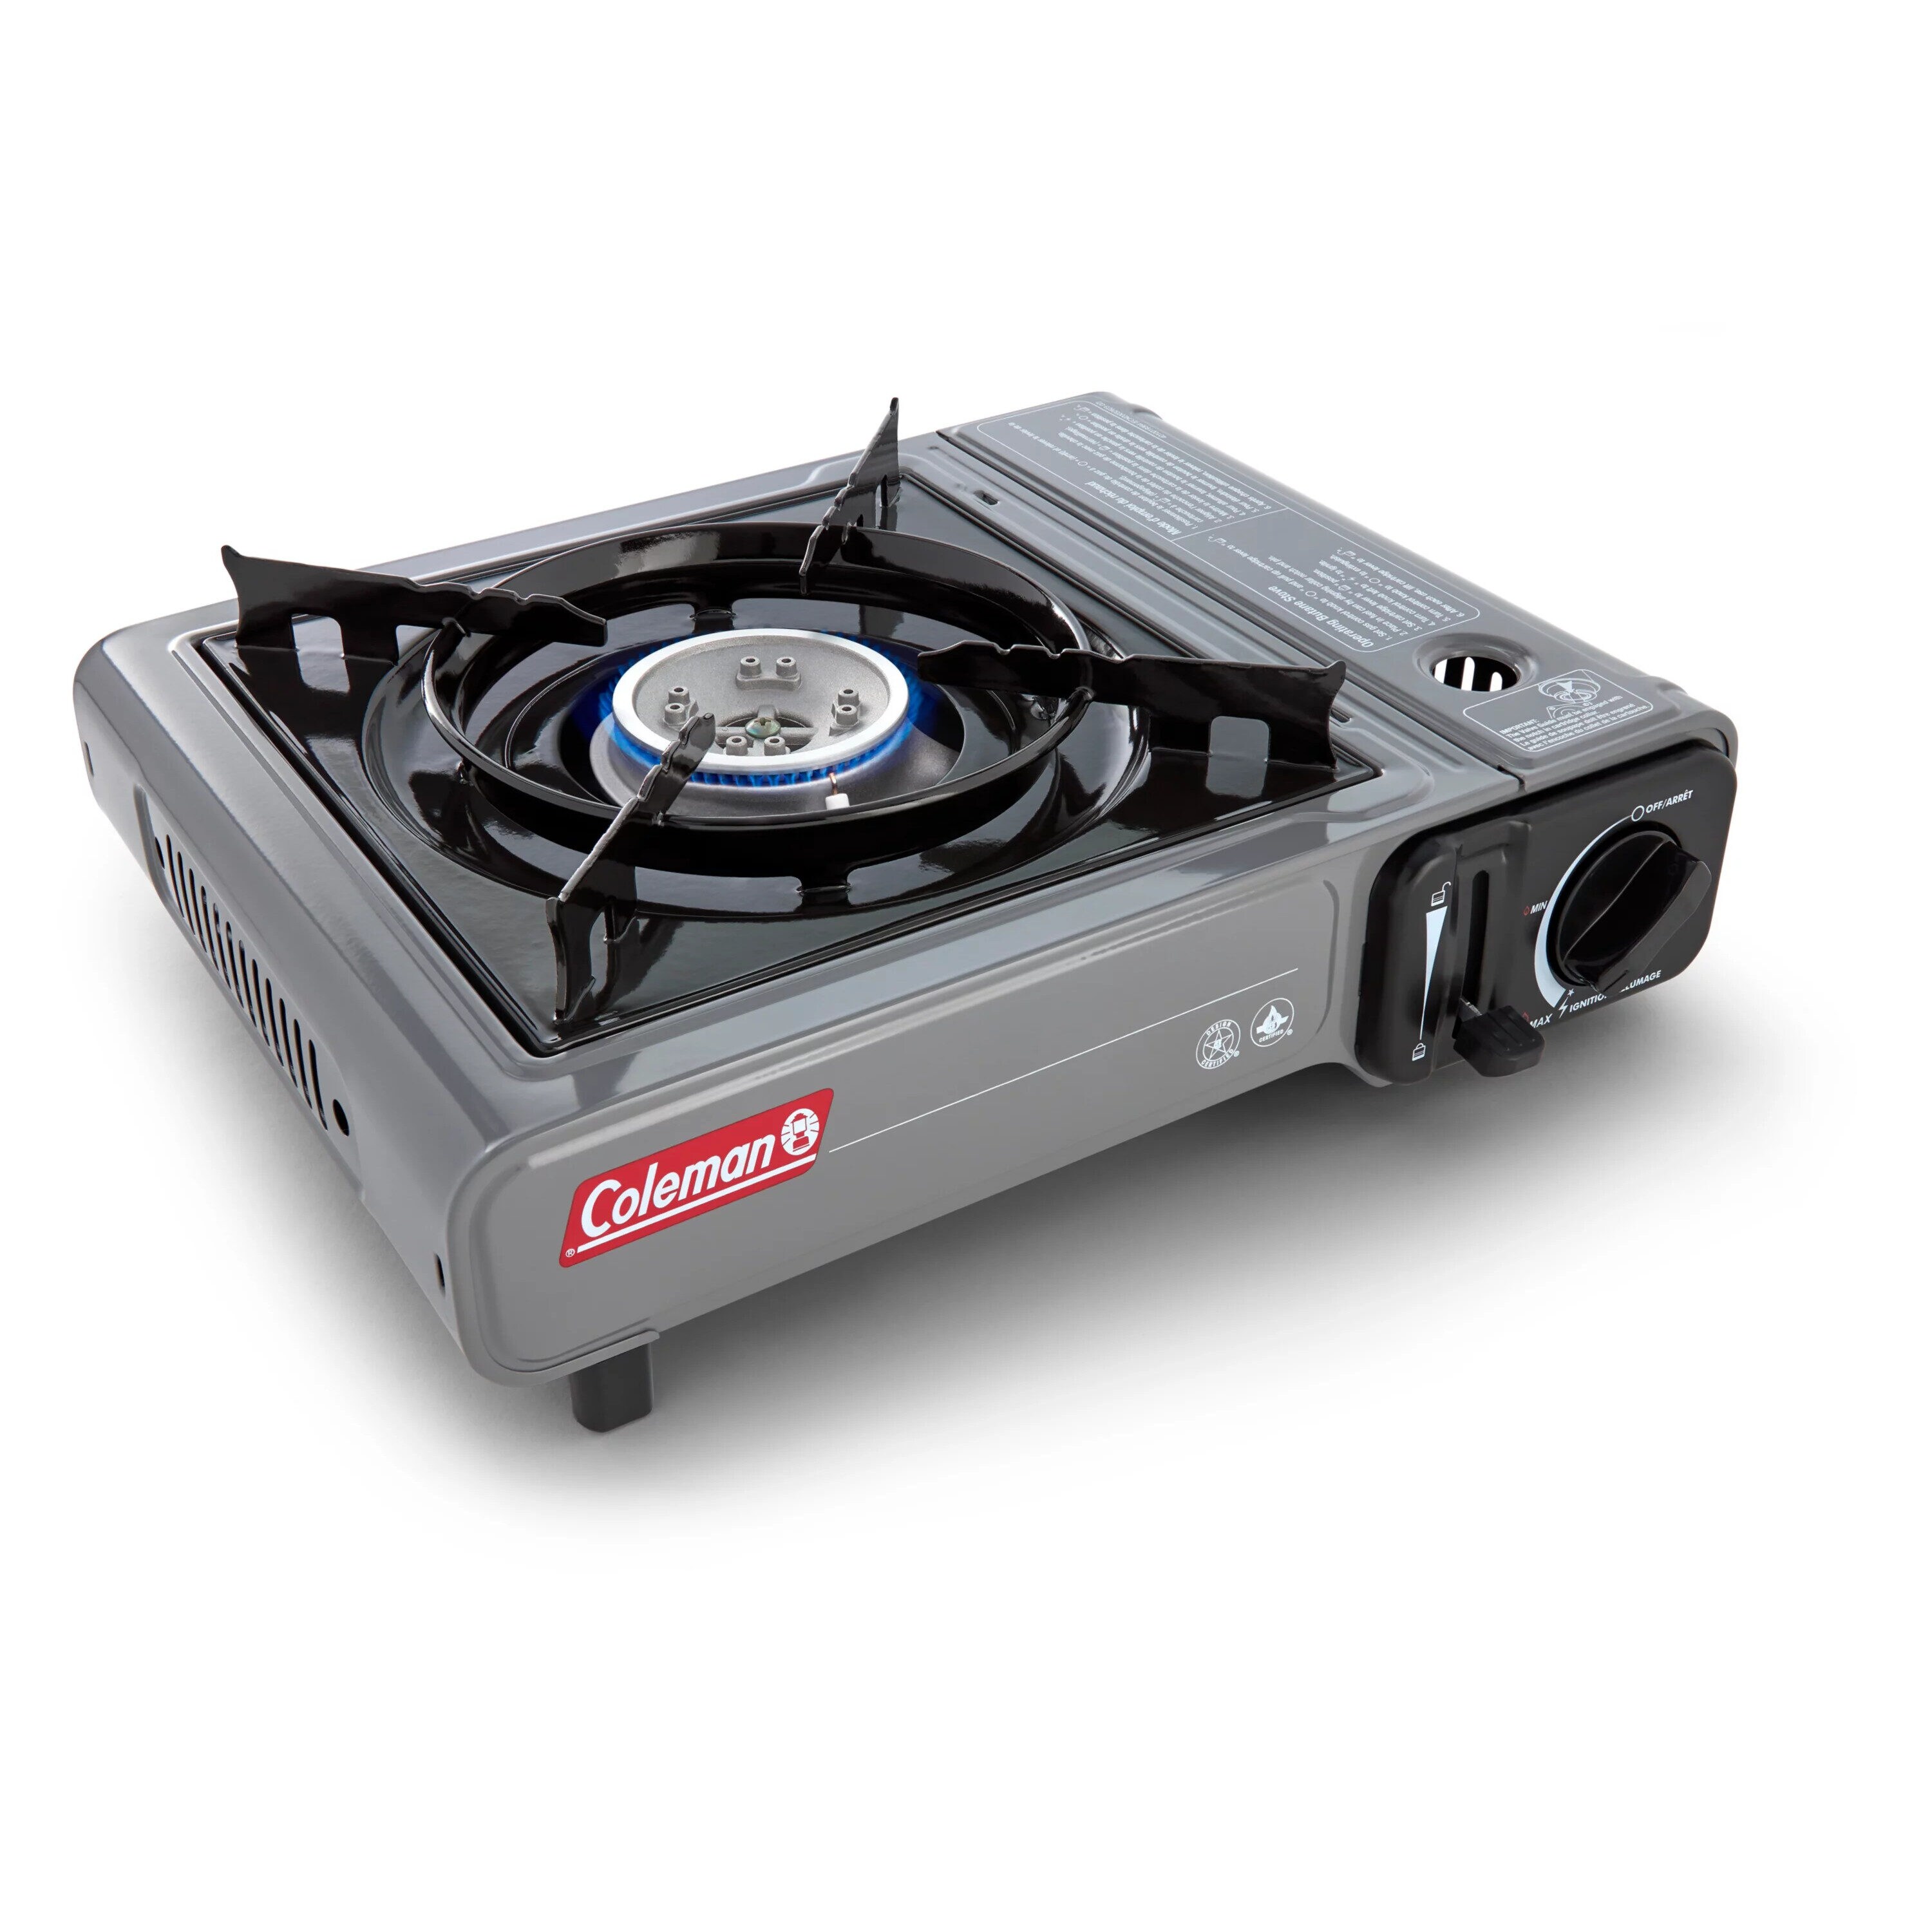 Portable Double Propane Gas 2 Burner Stove for Camping, Picnics, Tailgate,  and Contractors